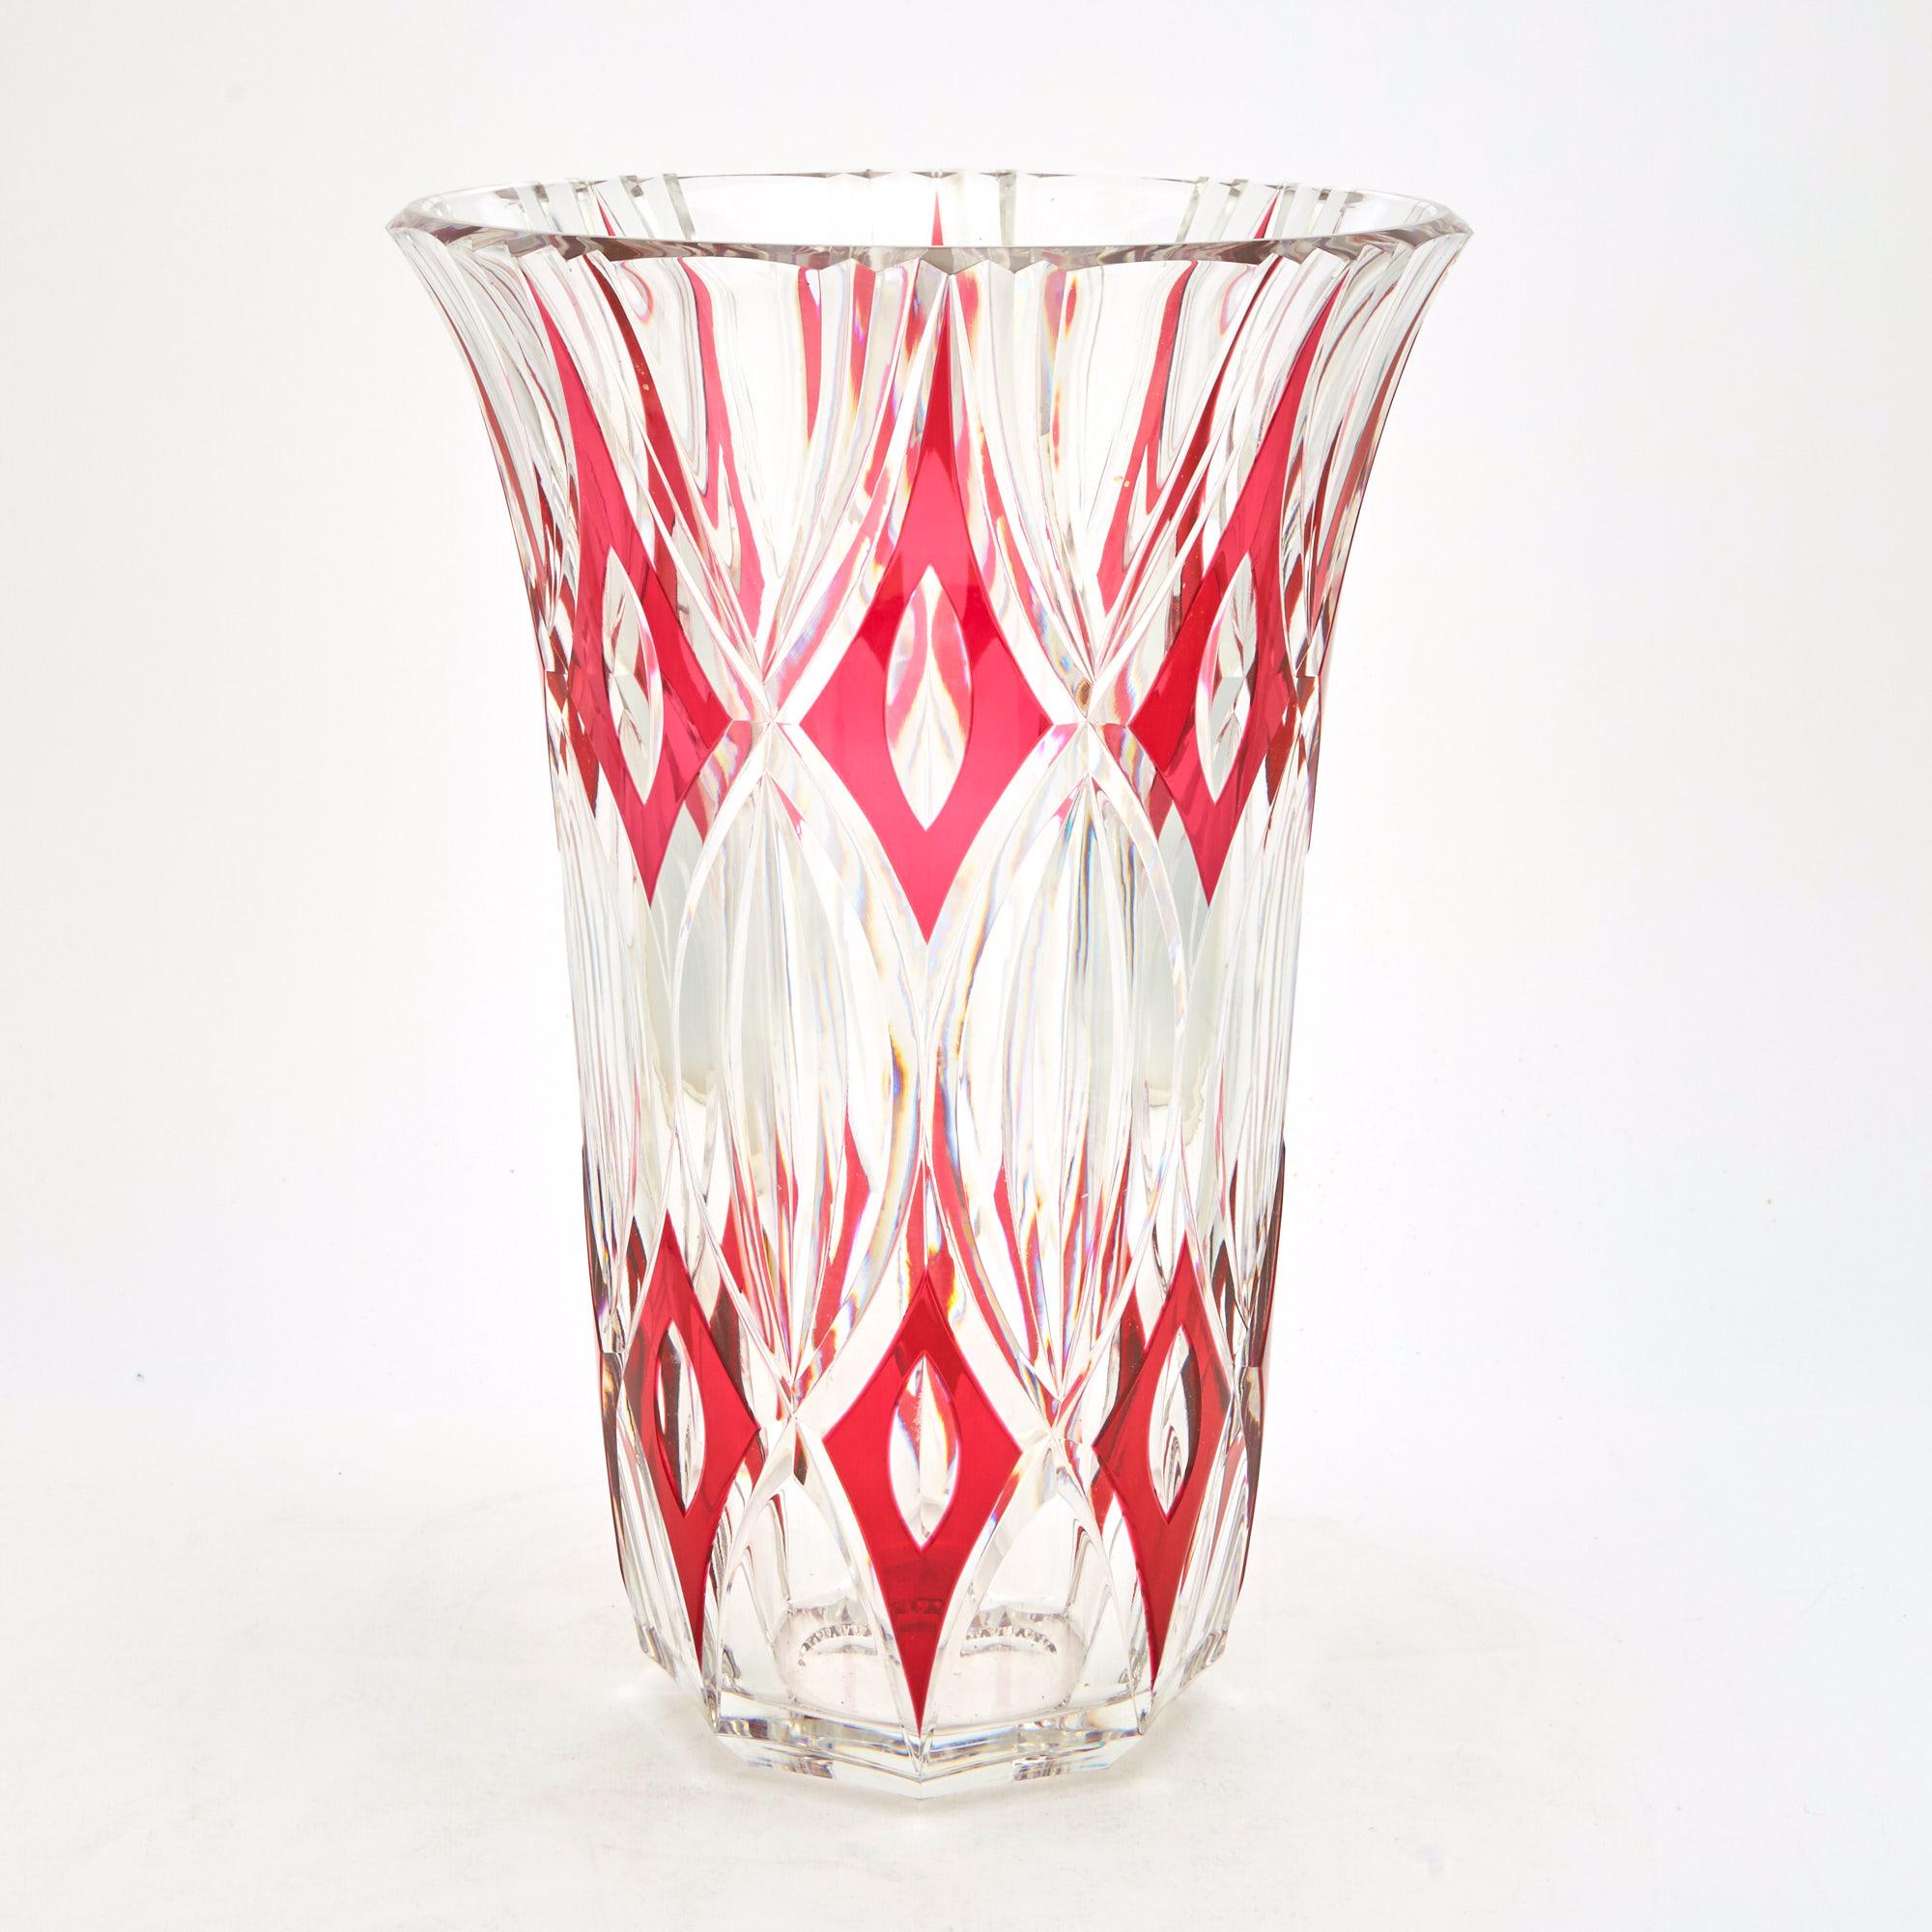 Unveil a truly remarkable and custom masterpiece, possibly created for an exhibition, as we proudly present this exceptional presentation vase. This distinctive creation is a testament to the unparalleled artistry of the renowned glass firm, Val